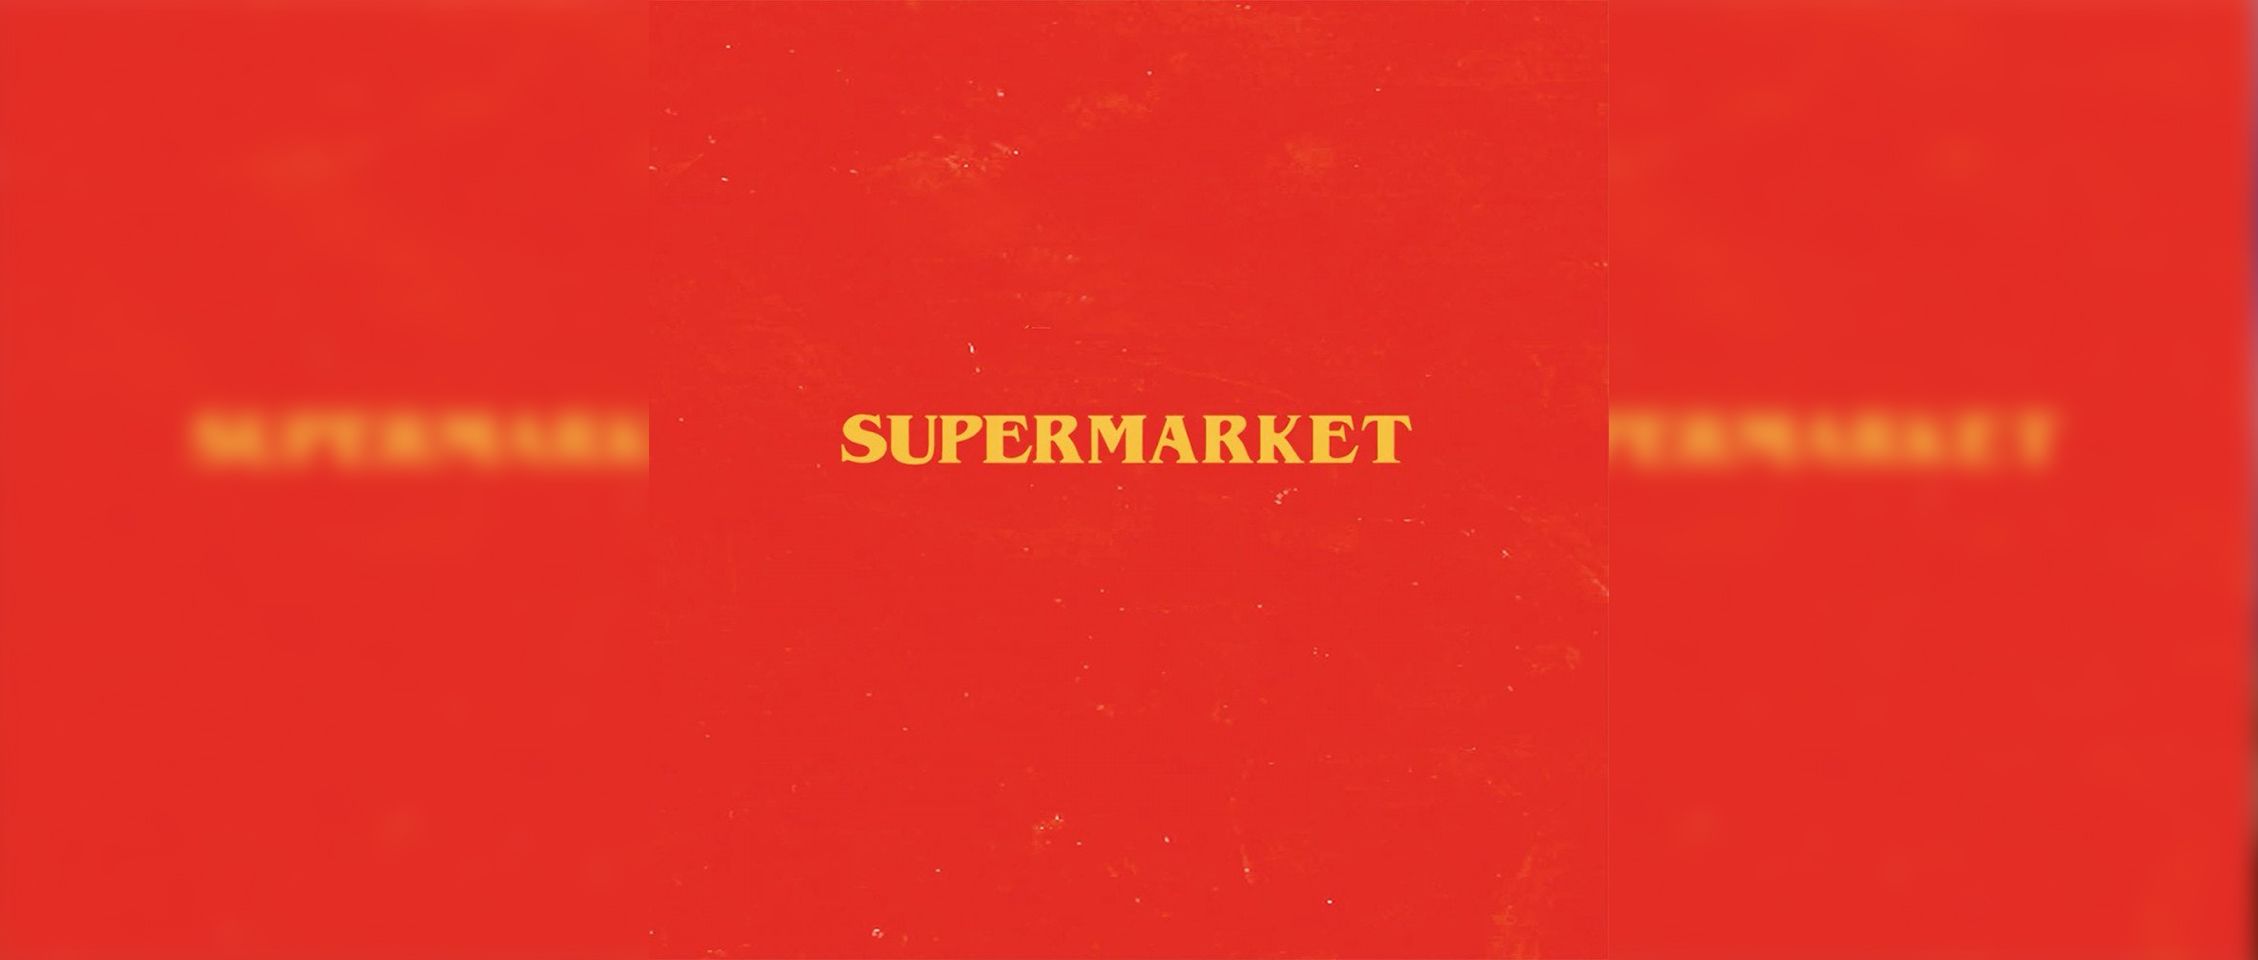 Logic doubles down on cheesiness with ‘Supermarket’